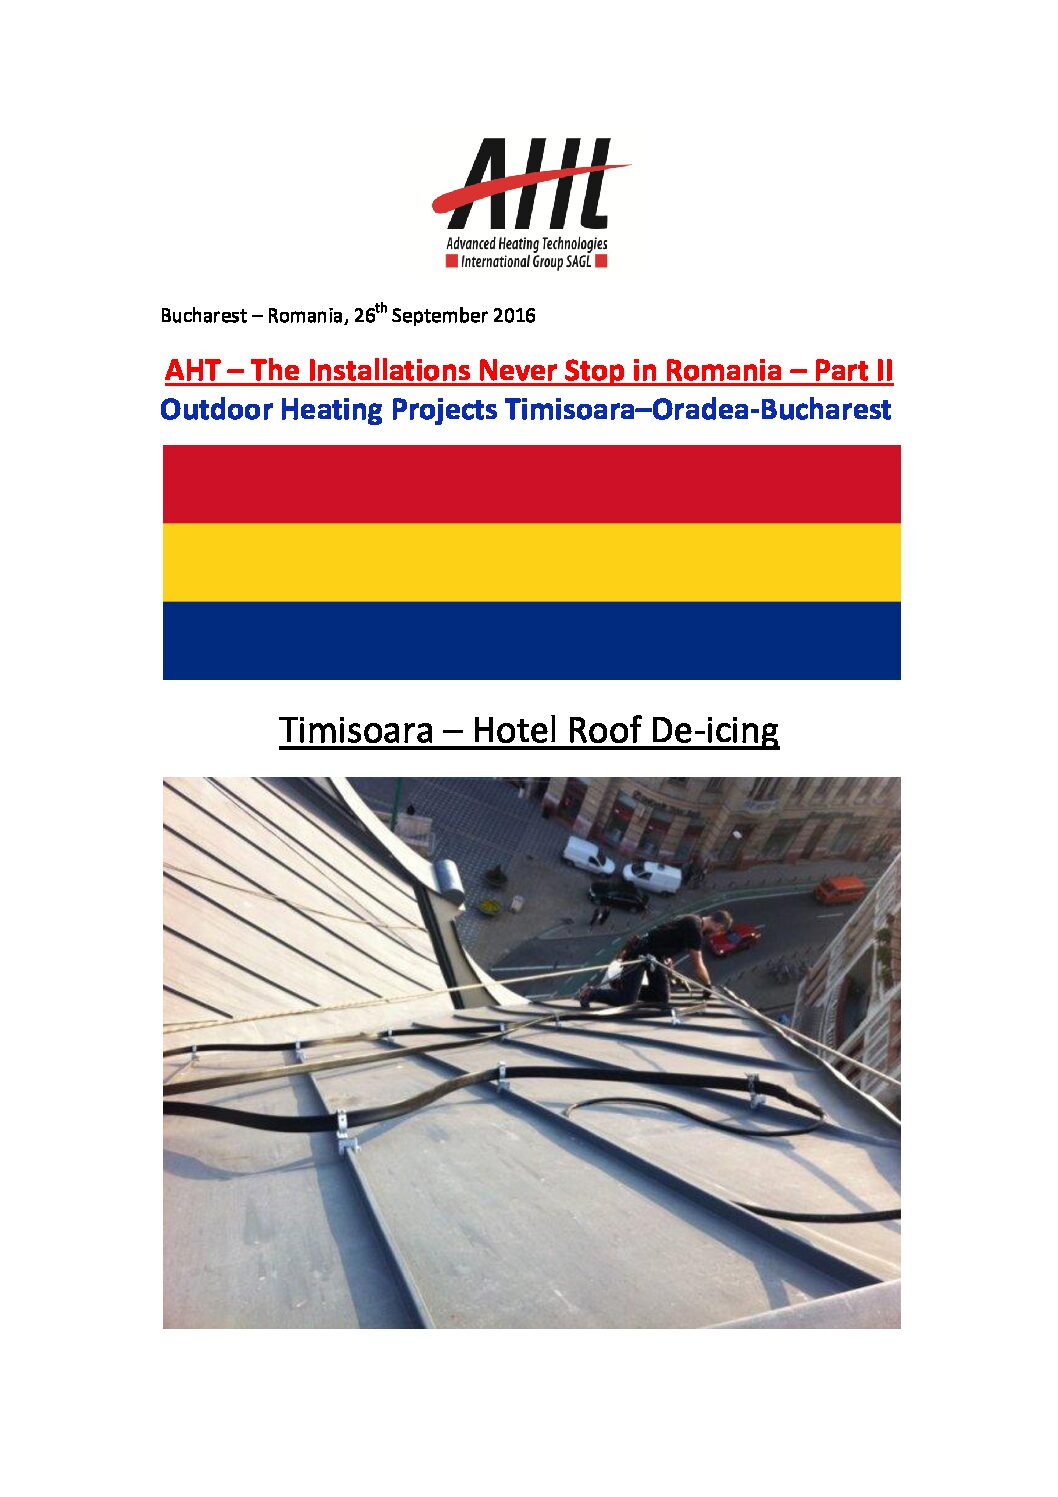 The-Installations-Never-Stop-in-Romania-Part-II-Outdoor-Heating-Projects_160926JK-pdf